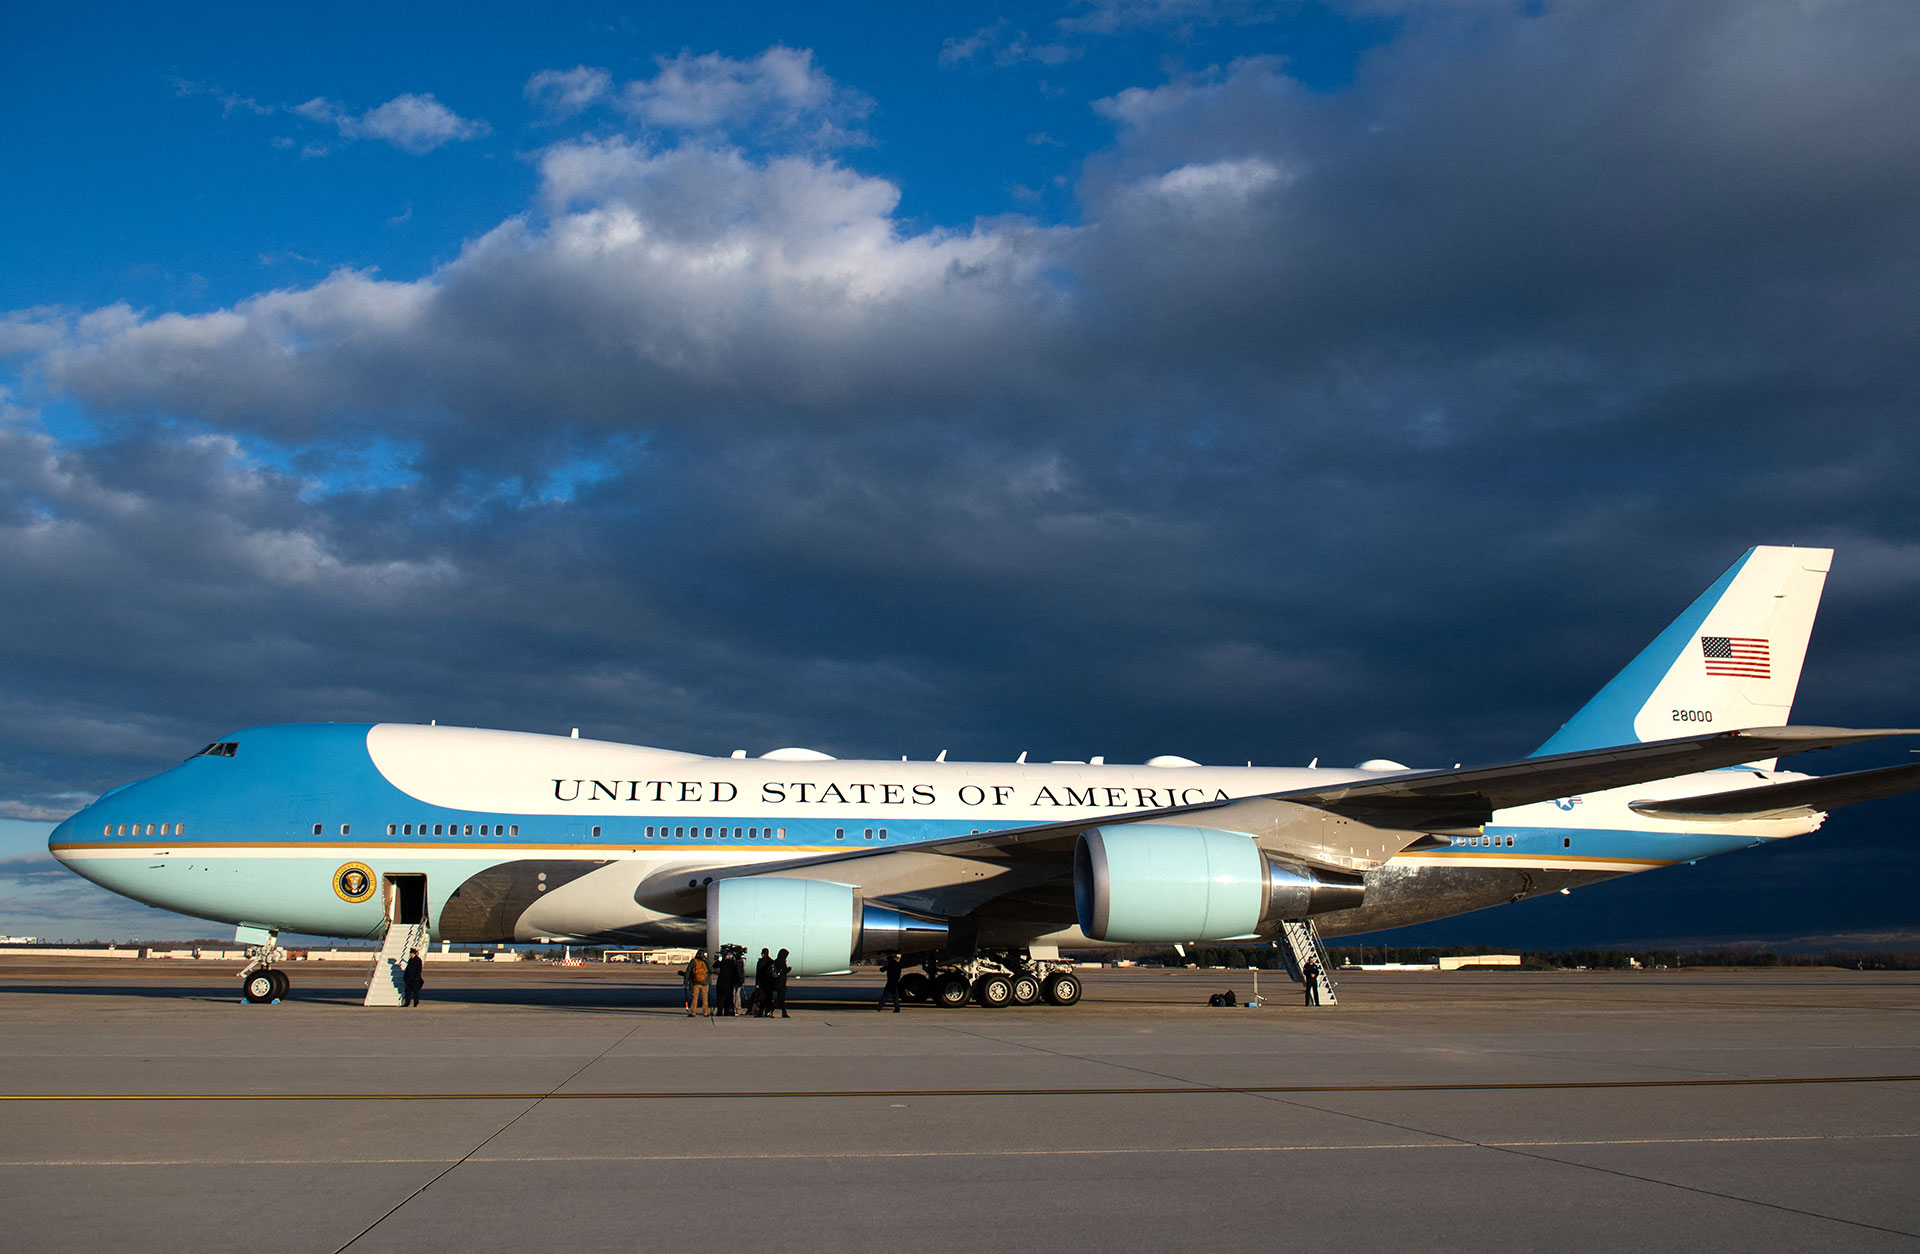 In this file photo taken on February 7, 2020, a Boeing 747 aircraft serving as Air Force One is seen on the runway at Joint Base Andrews in Maryland.  SAUL LOEB / AFP